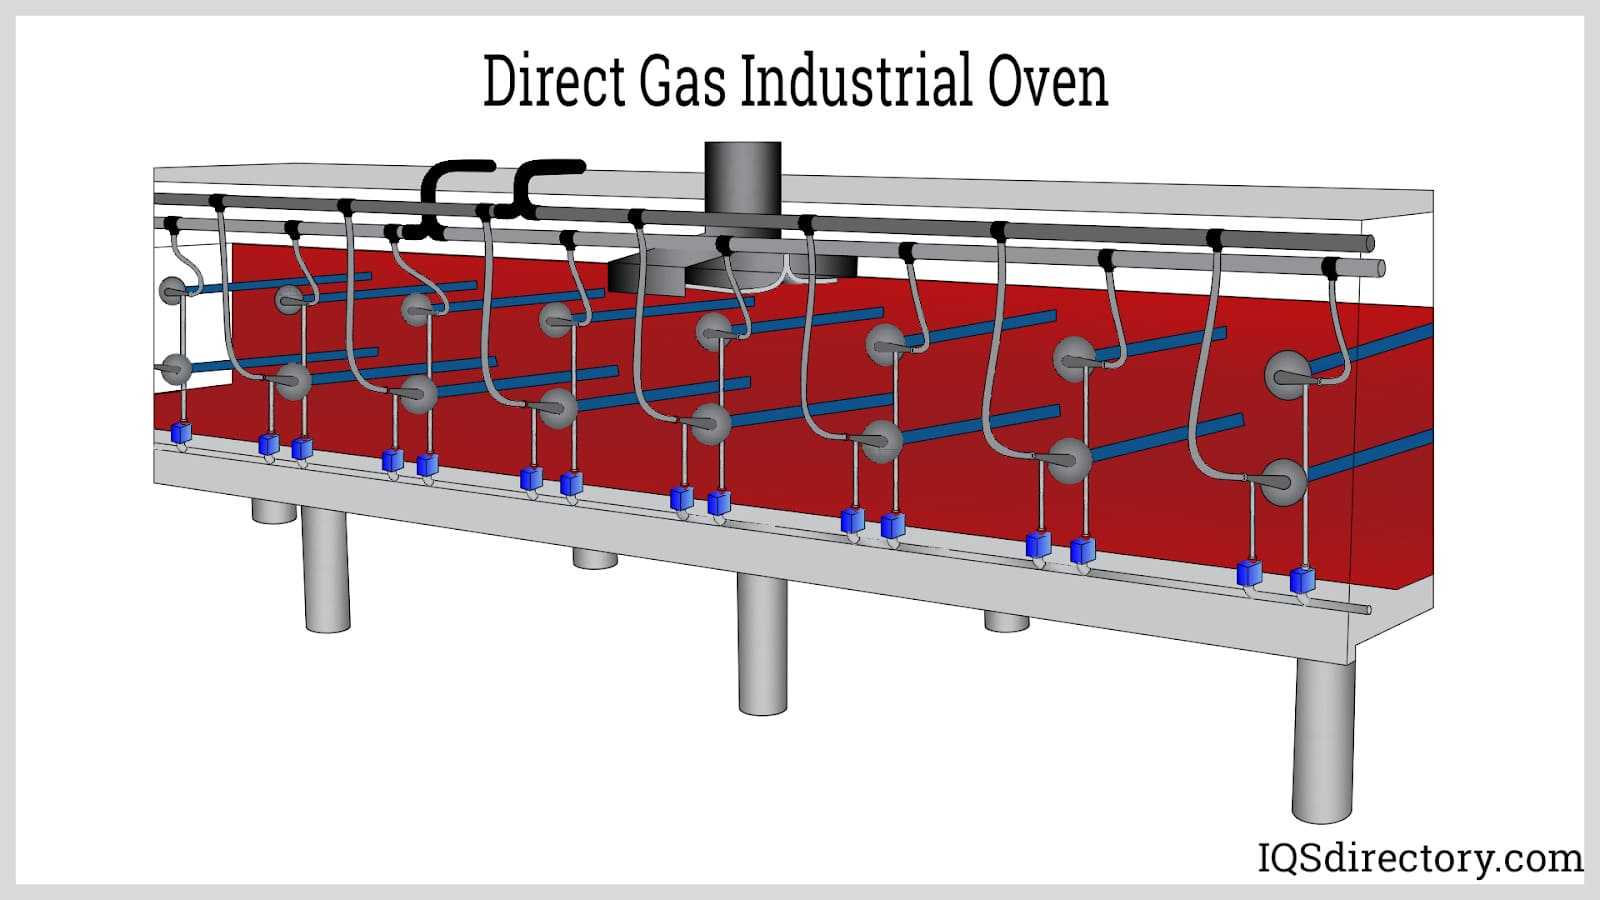 Direct Gas Industrial Oven